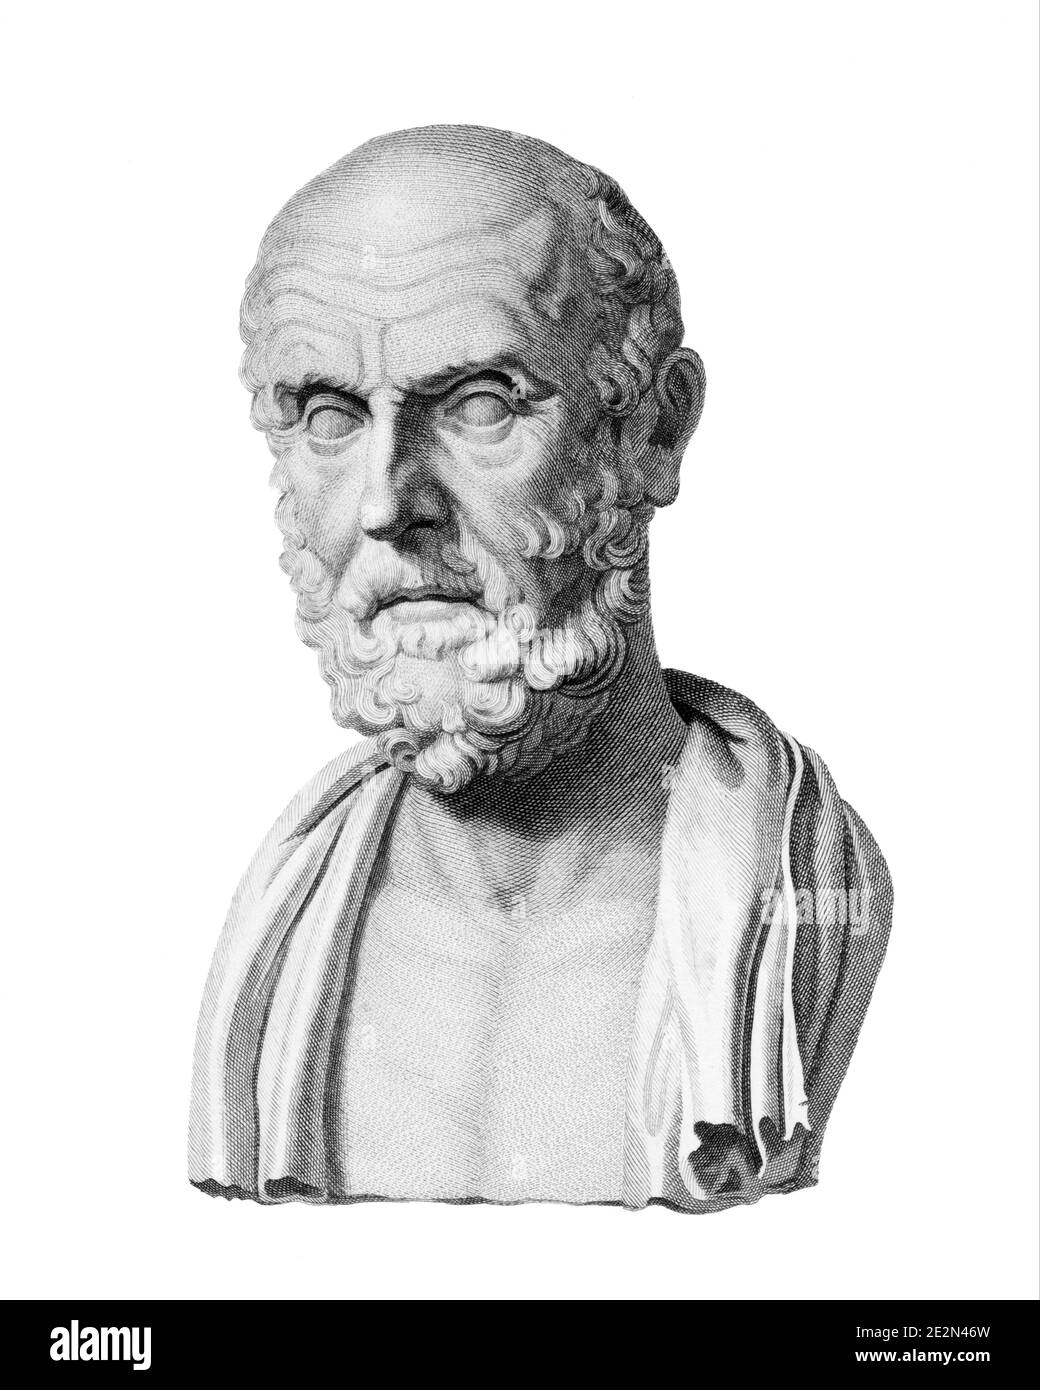 1980s BUST OF HIPPOCRATES OF KOS GREEK PHYSICIAN 400 BC FATHER OF PROFESSIONAL MEDICINE CREDIT FOR TRADITIONAL HIPPOCRATIC OATH - q53133 CPC001 HARS HEALING BUST DIAGNOSIS LEADERSHIP PHYSICIANS INNOVATION HEALTH CARE OF FACIAL HAIR IMPAIRMENT OCCUPATIONS TREATMENT HEALER OATH PHYSICIAN PRACTITIONER 400 BEARDS PROFESSIONALS BC BCE BLACK AND WHITE DISEASE OLD FASHIONED Stock Photo